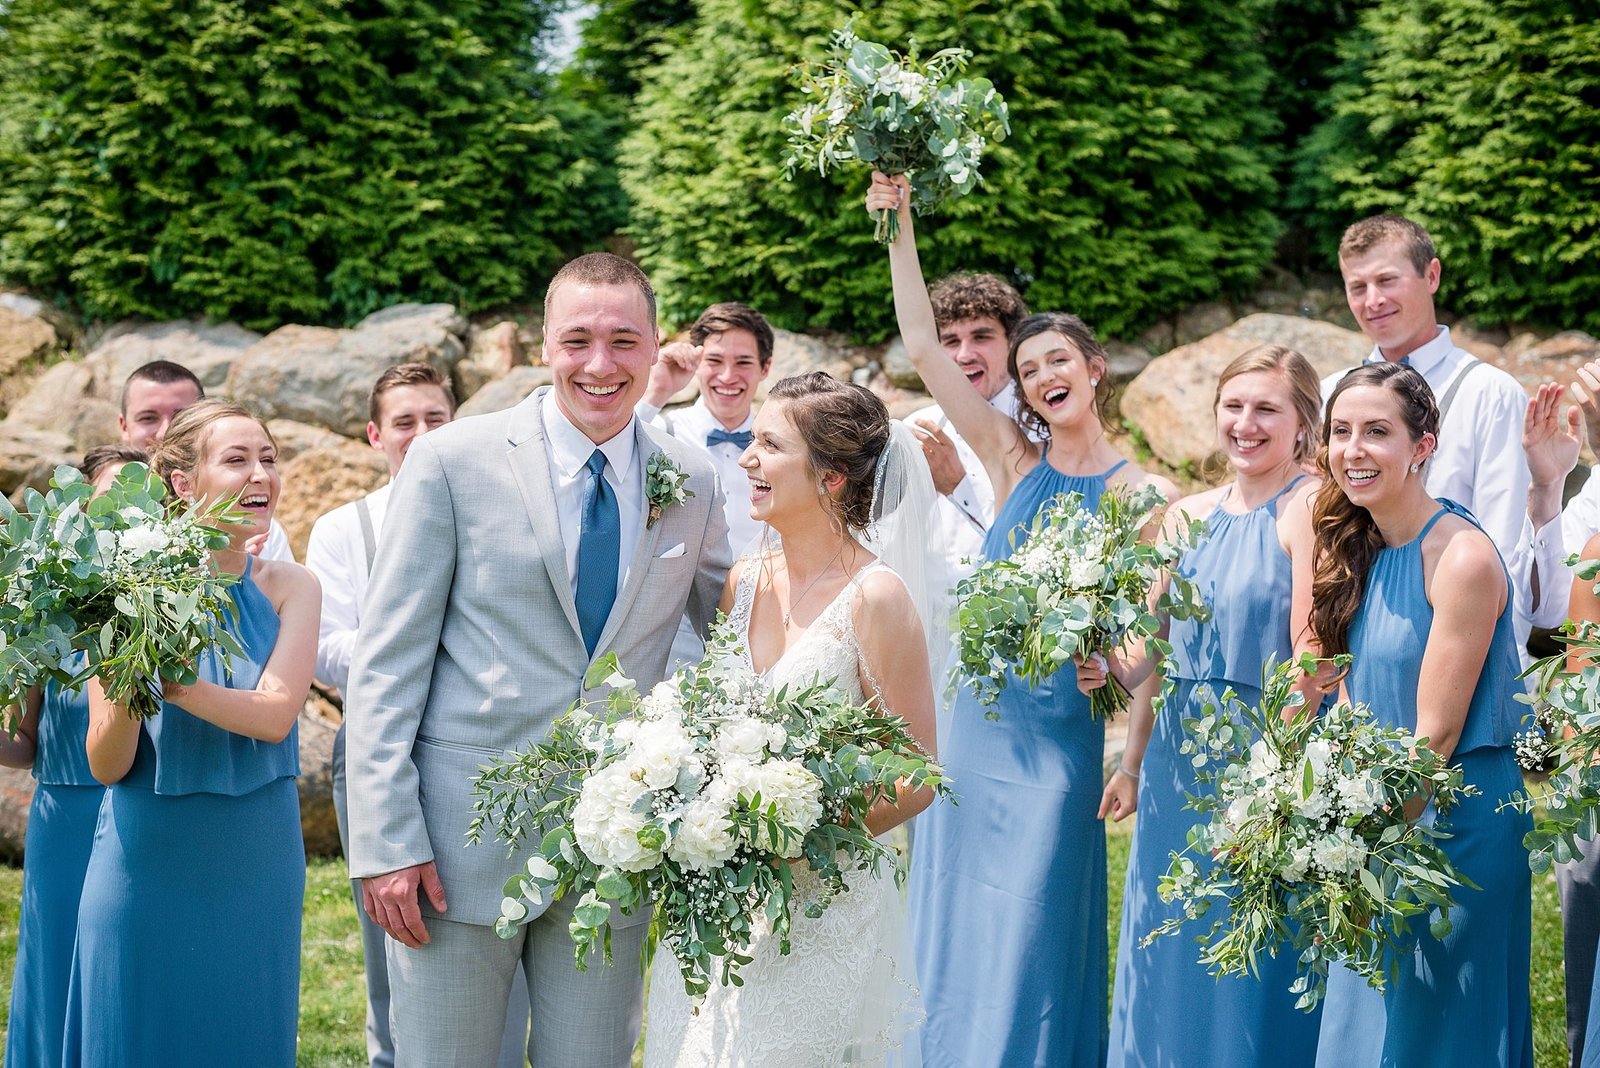 Maryland and Pennsylvania Wedding Photographer who specializes in natural light photography